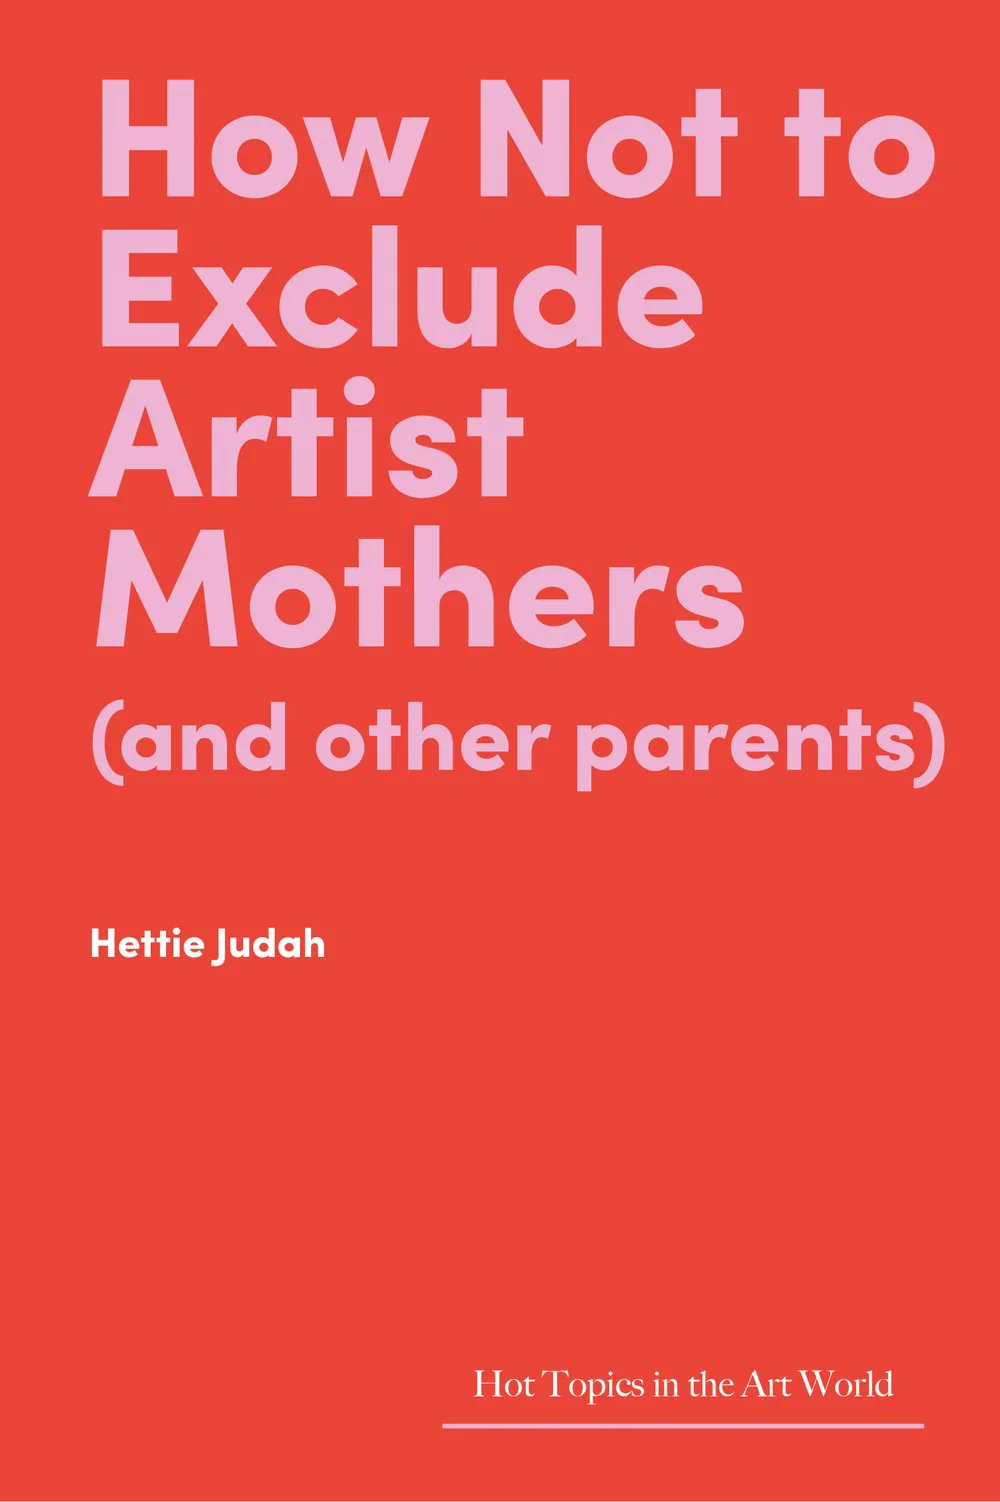 How not to exclude artist mothers